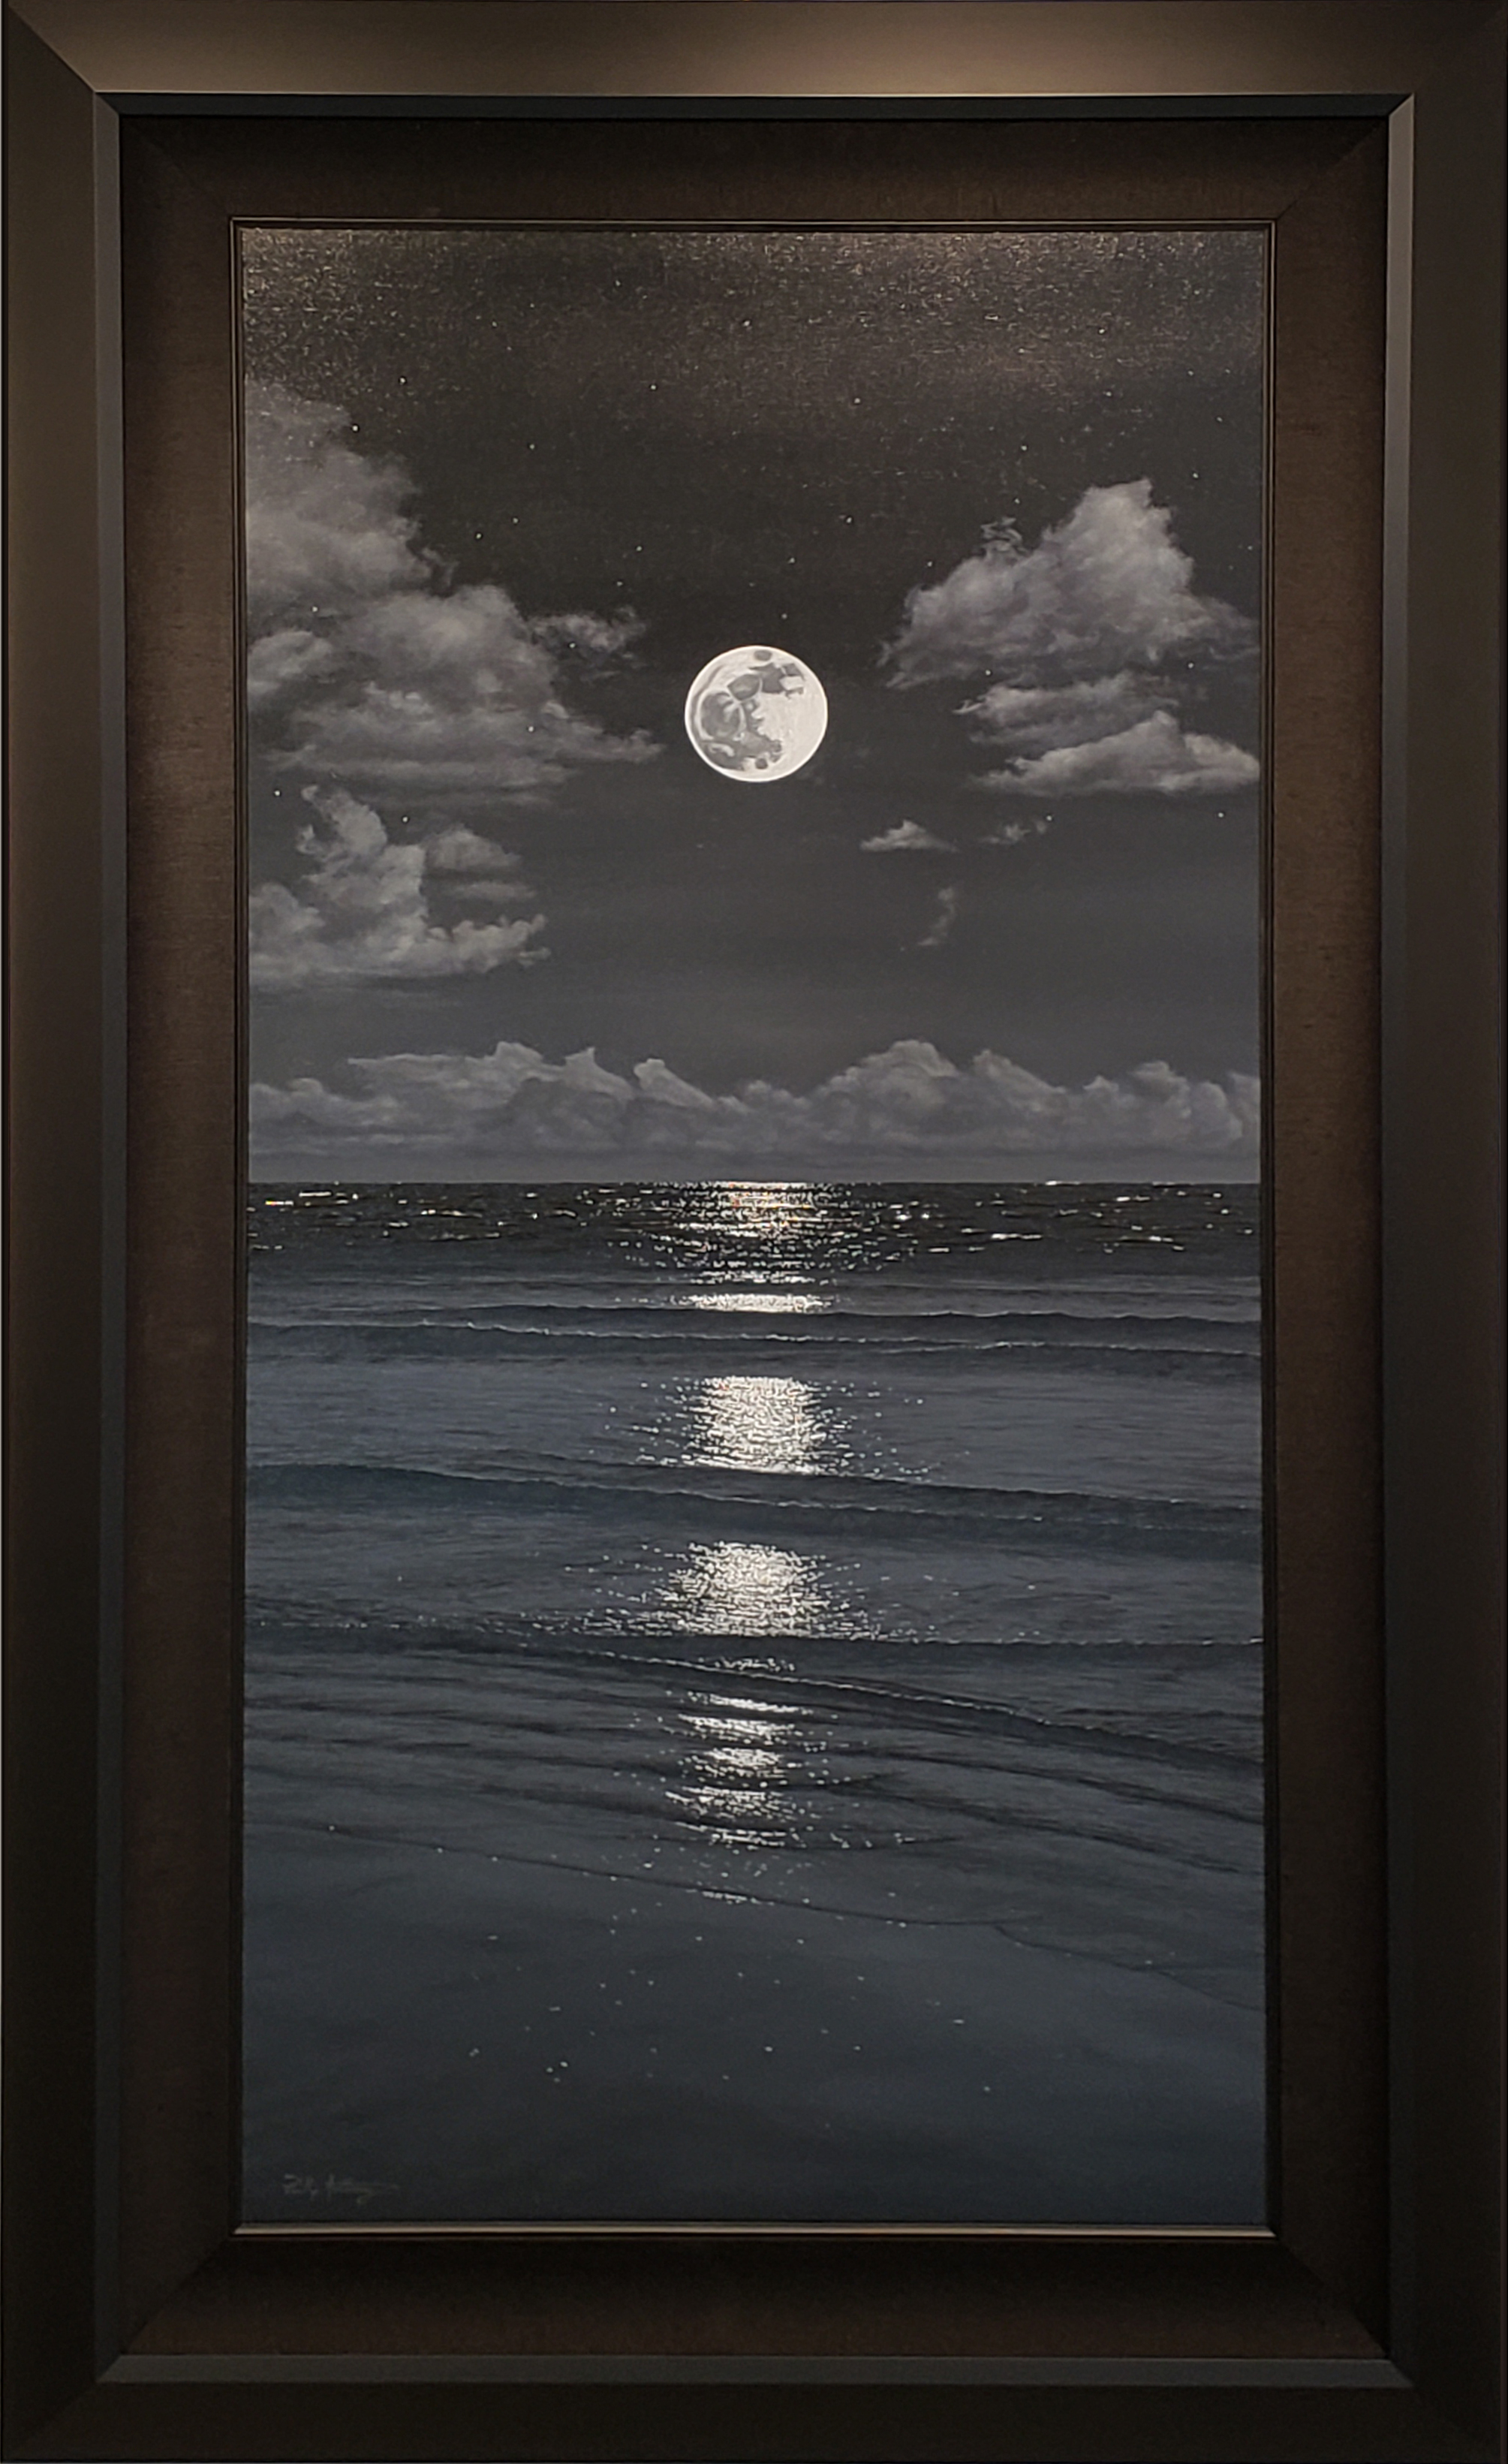 Phillip Anthony I Love Reflecting on the Night with You (Original) (Framed)